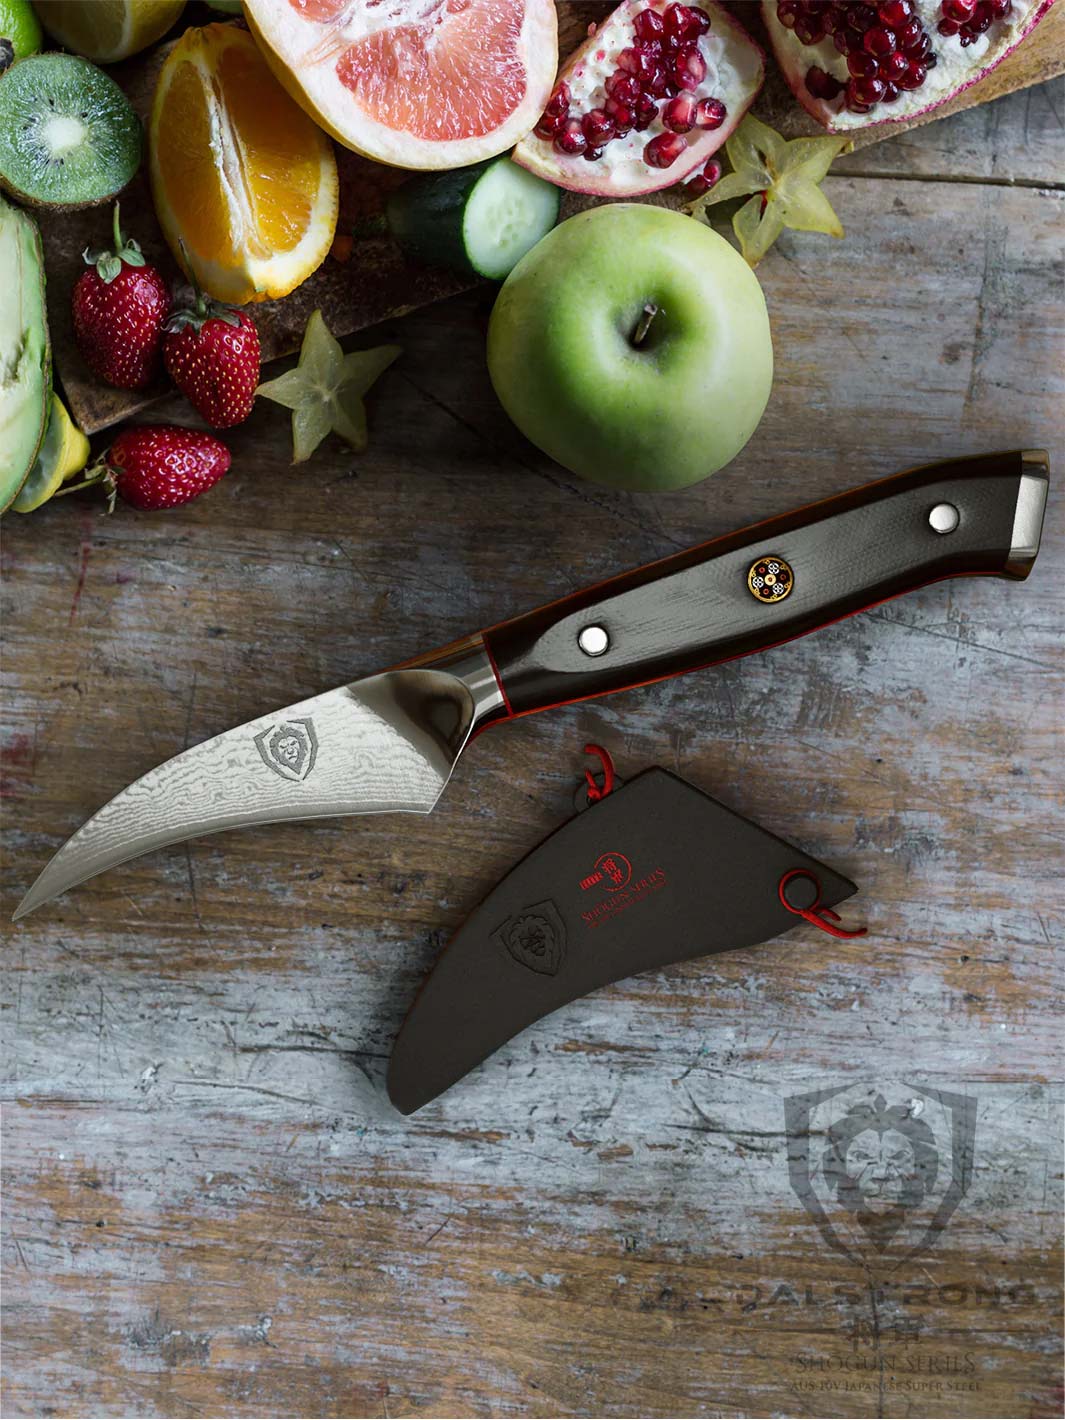 Dalstrong shogun series 3 inch bird beak paring knife with black handle and different kinds of fruits on top of it.